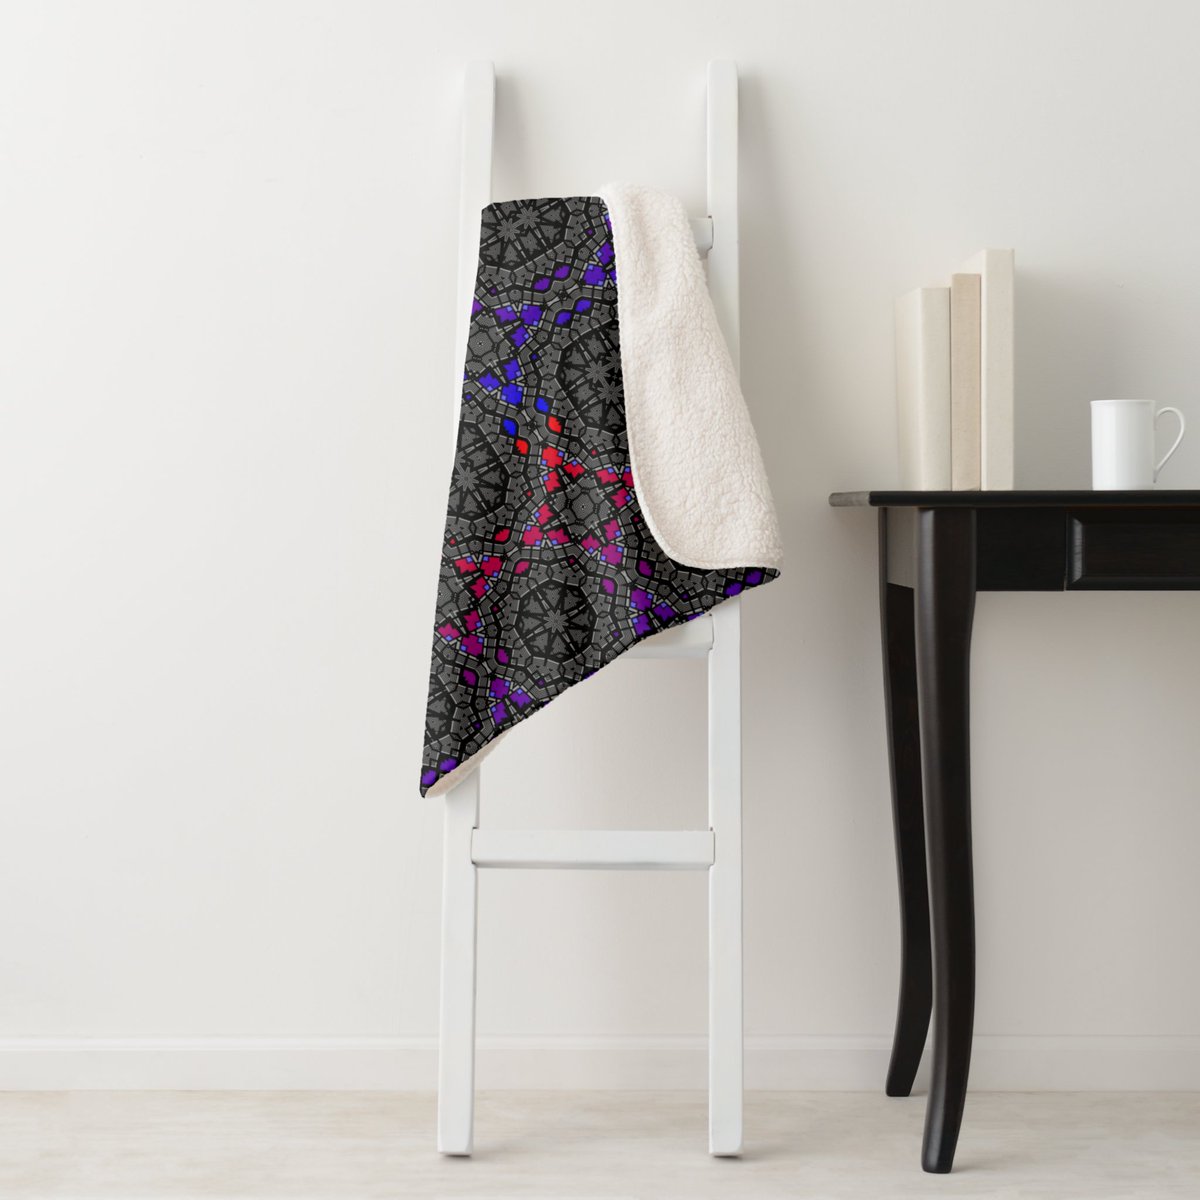 Your Day Sherpa Blankets [13] 17 zazzle.com/z/g5tw78ji?rf=…
Stay warm in these kaleidoscope themed Sherpa blankets.
Lots more to make yours at #jckshop
#Blankets #throwblanket #sherpablanket #everydayblankets #printondemand #ecommerce #business #mindfulart #geometryart #zazzlemade